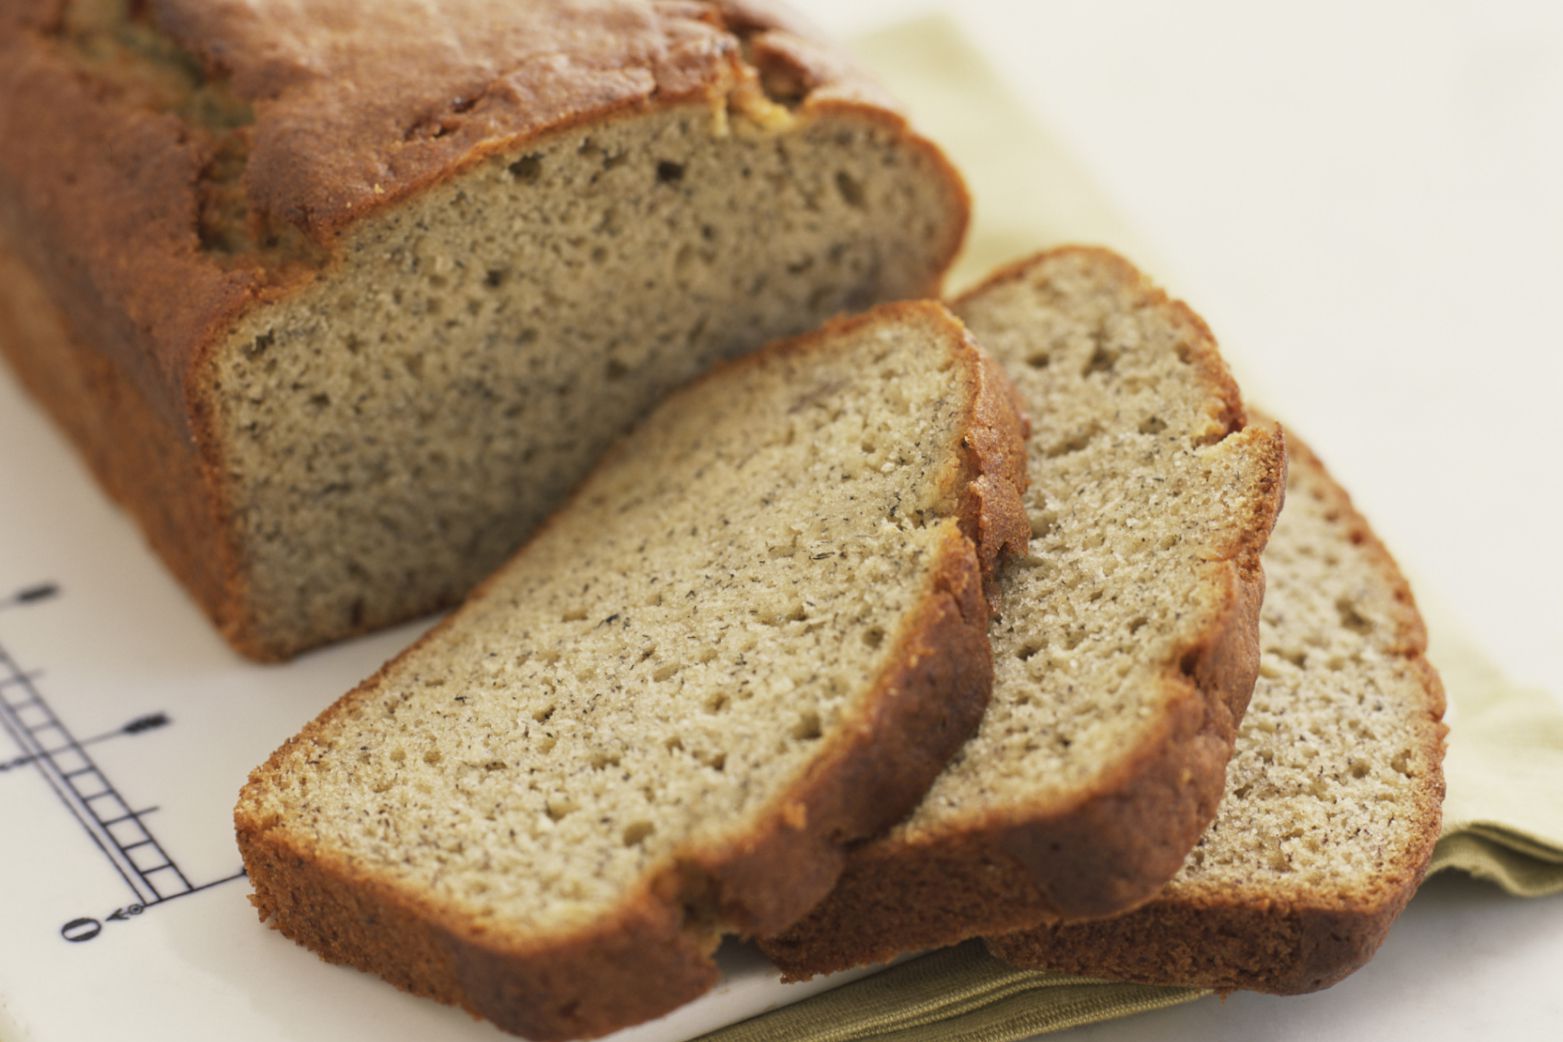 Make One Egg Banana Bread with This Easy Recipe